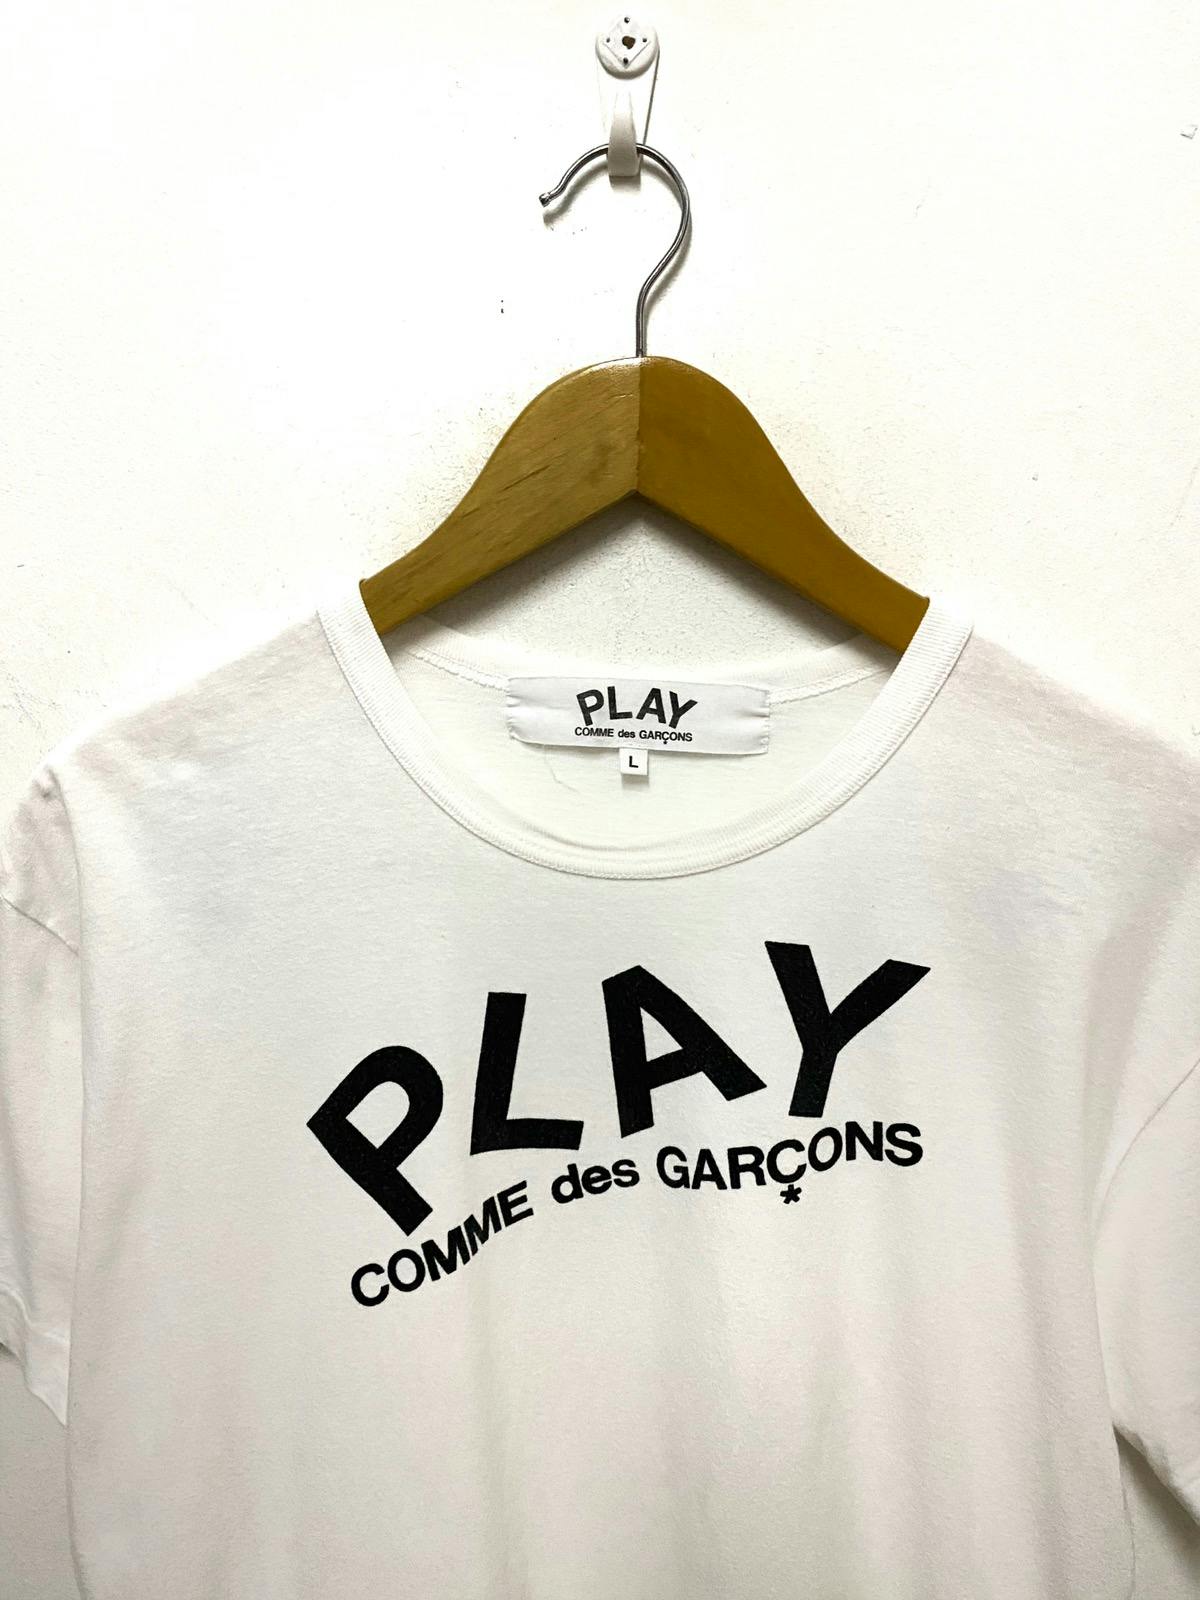 CDG Play Comme des Garcons Tshirt - 2